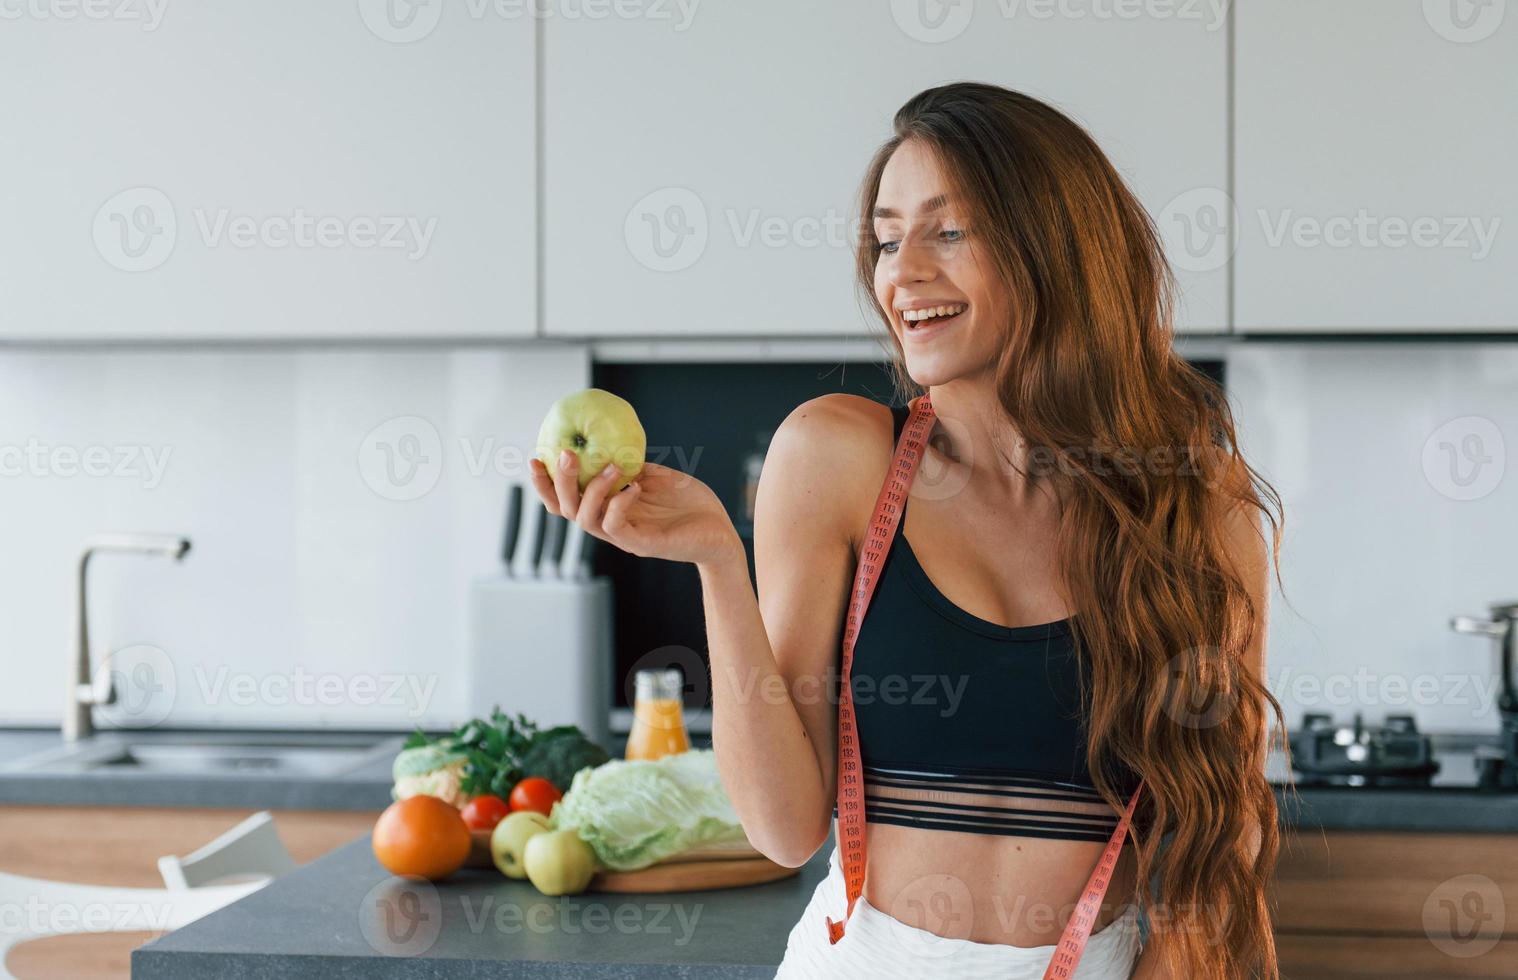 Holds apple in hand. Young european woman is indoors at kitchen indoors with healthy food photo